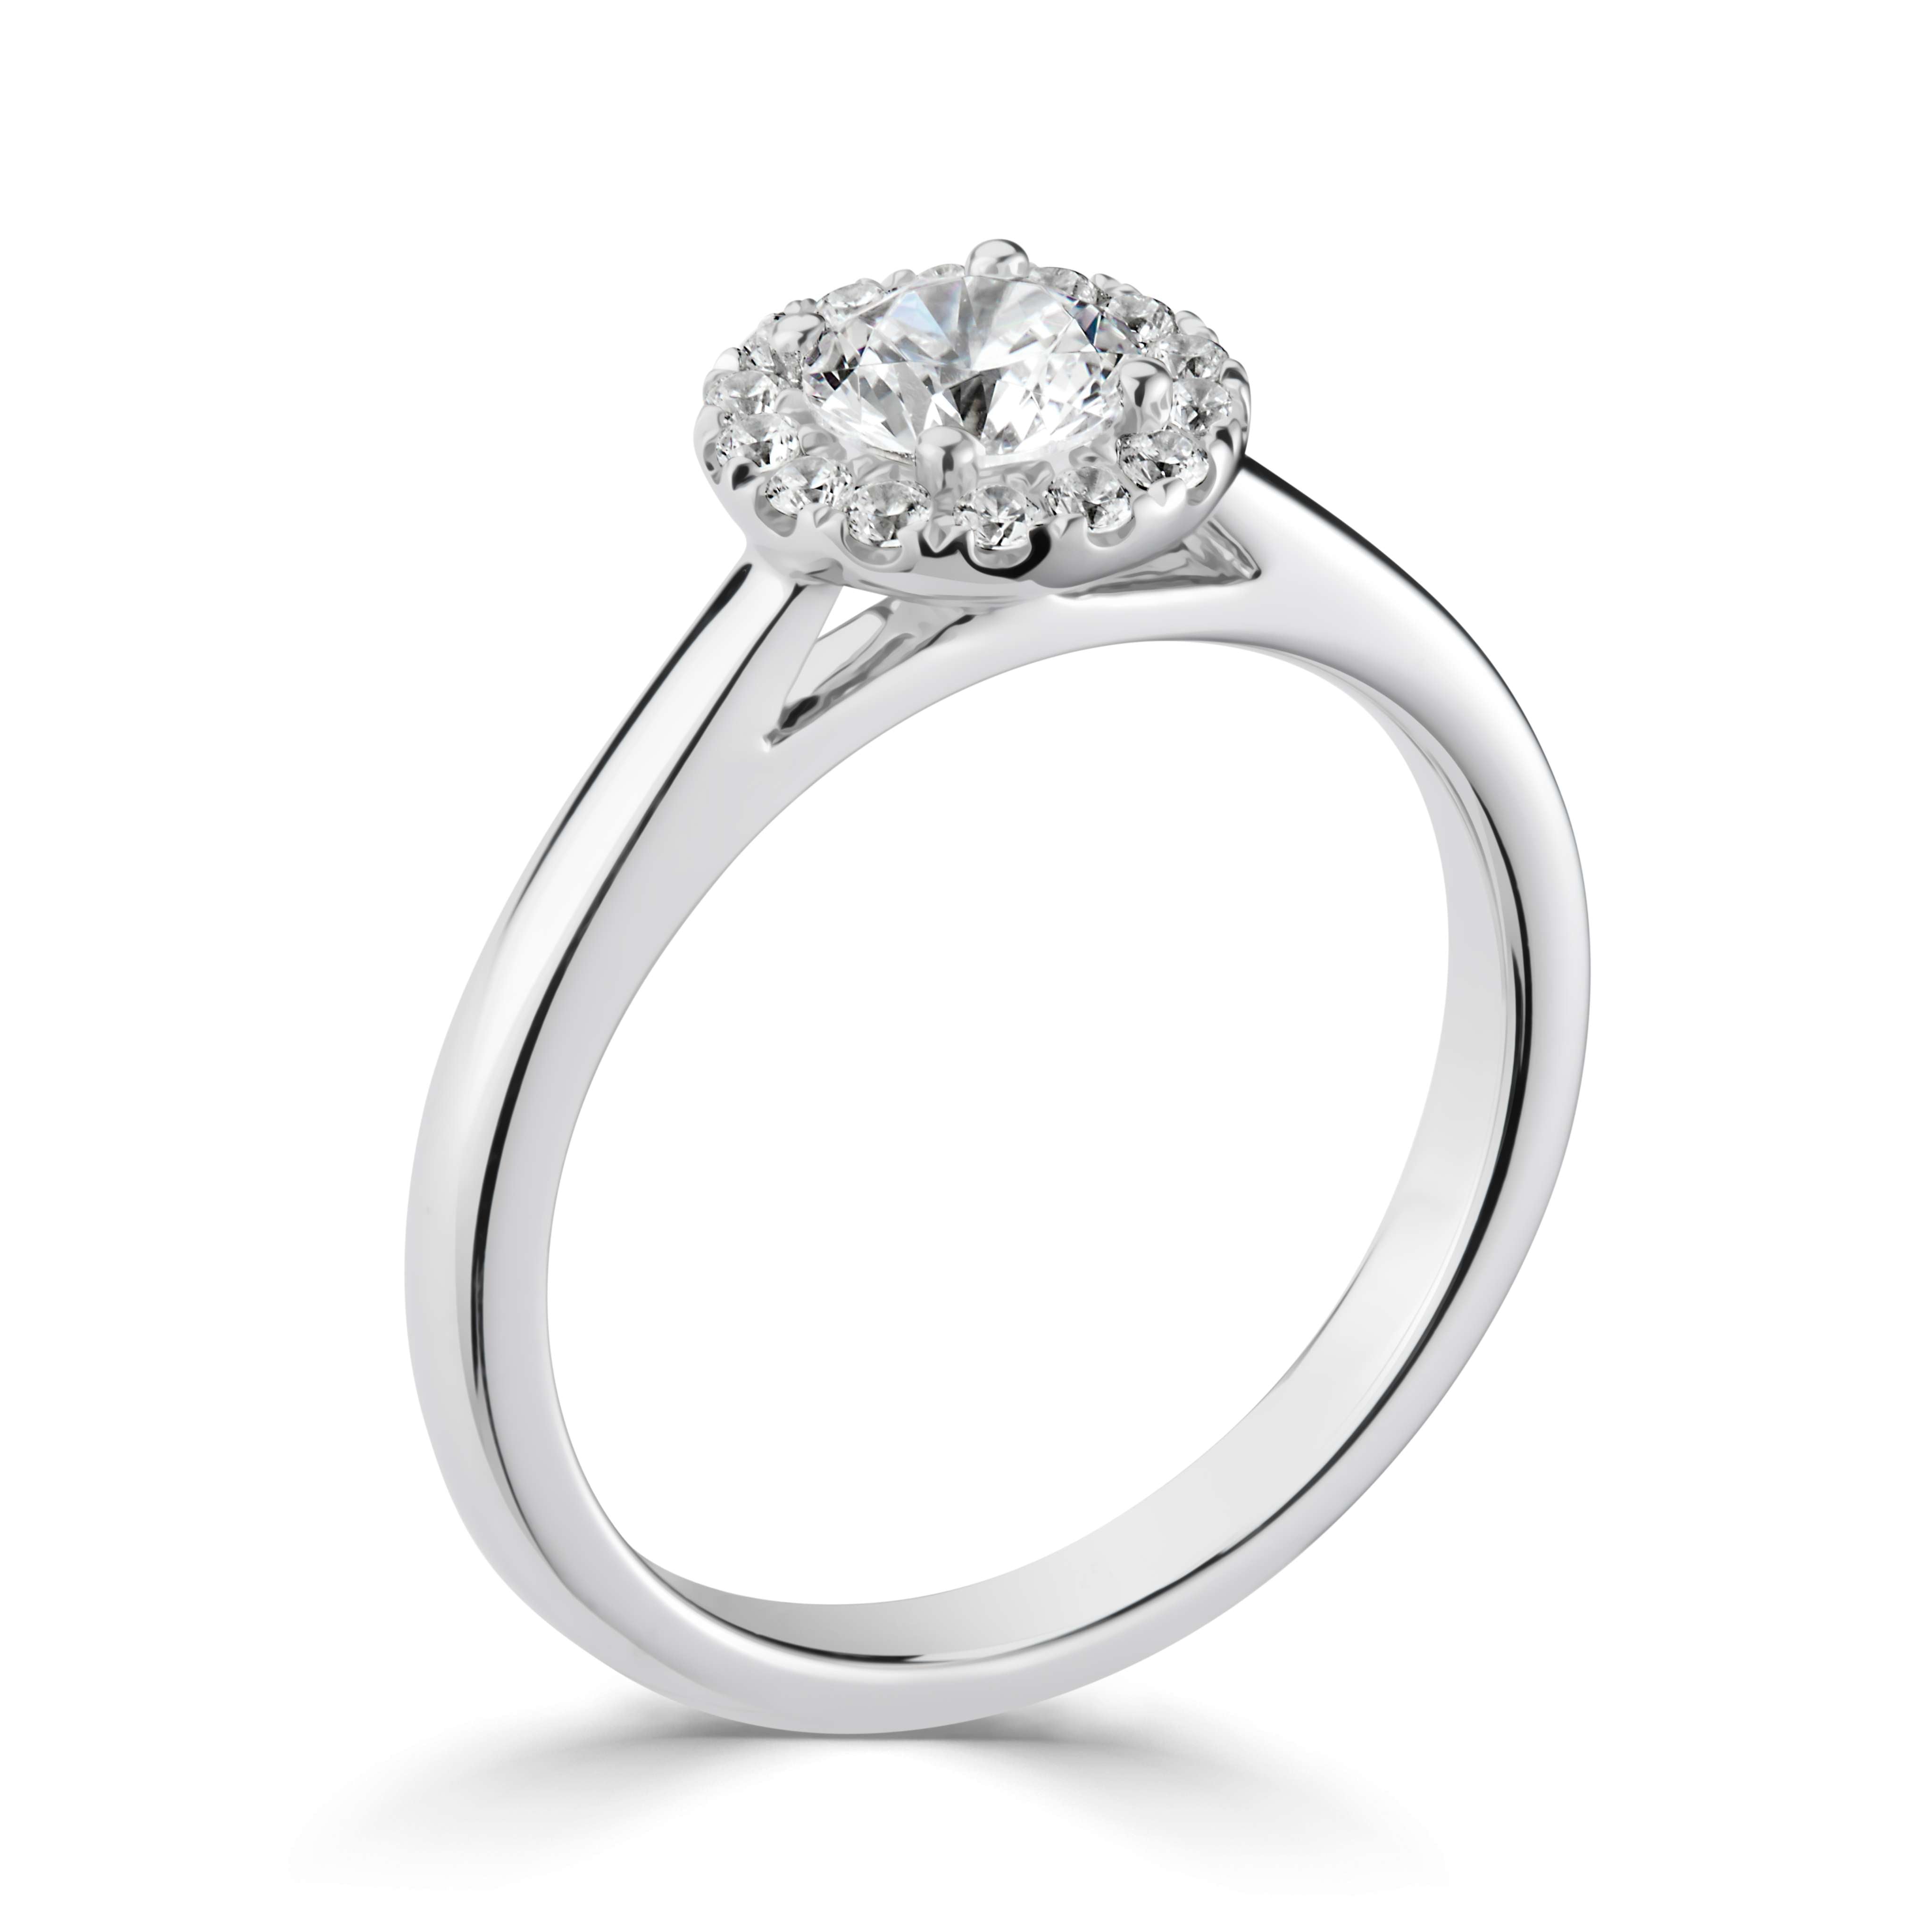 Kyla *Select a Round Diamond 0.25ct or above